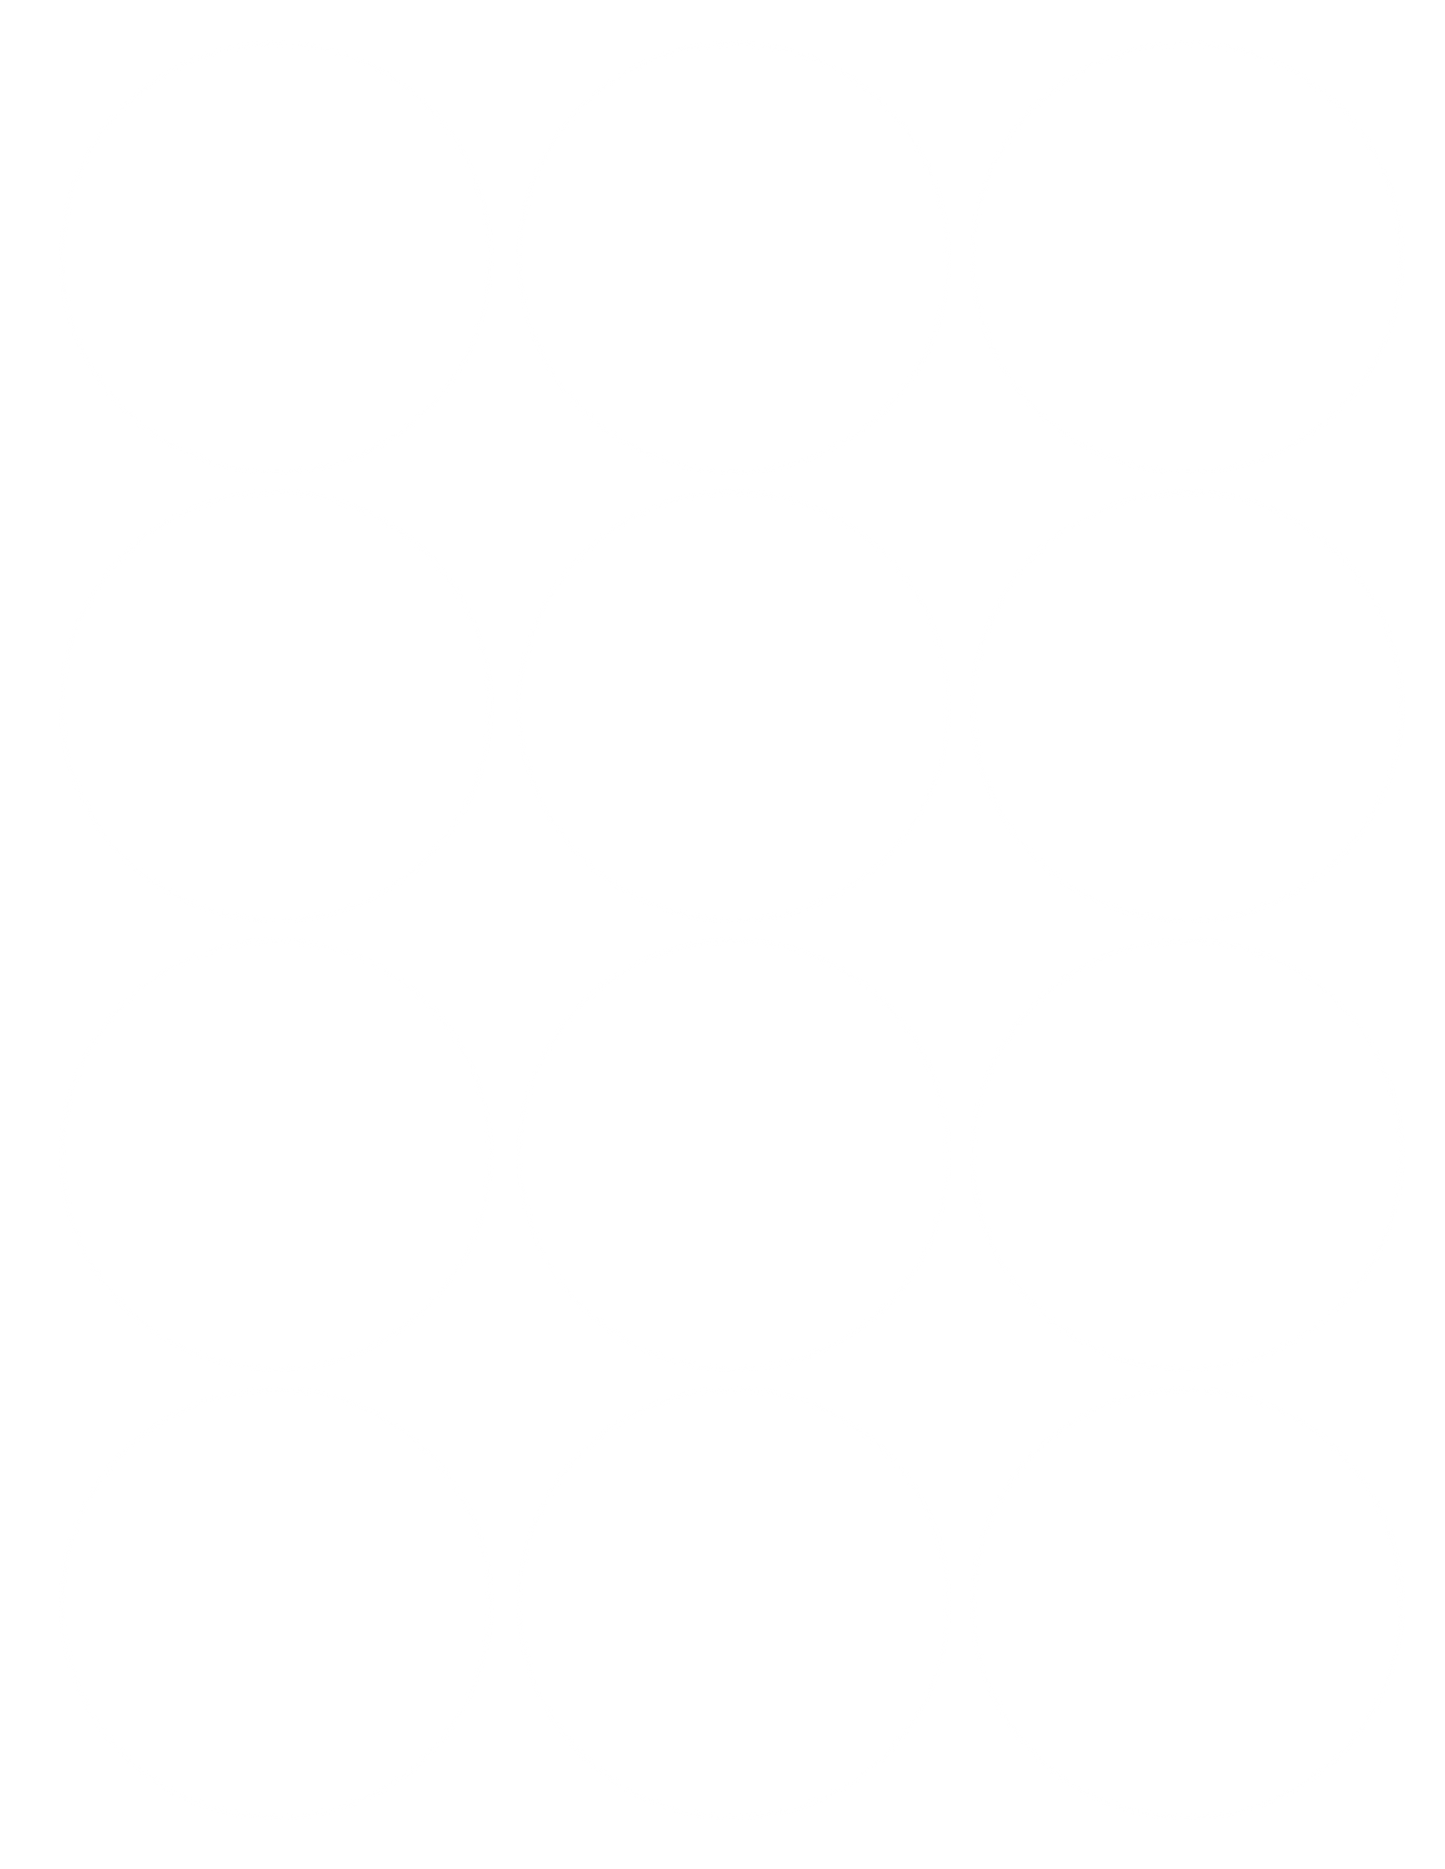 TEMPLATE 2".50 Circles Collage Sheet